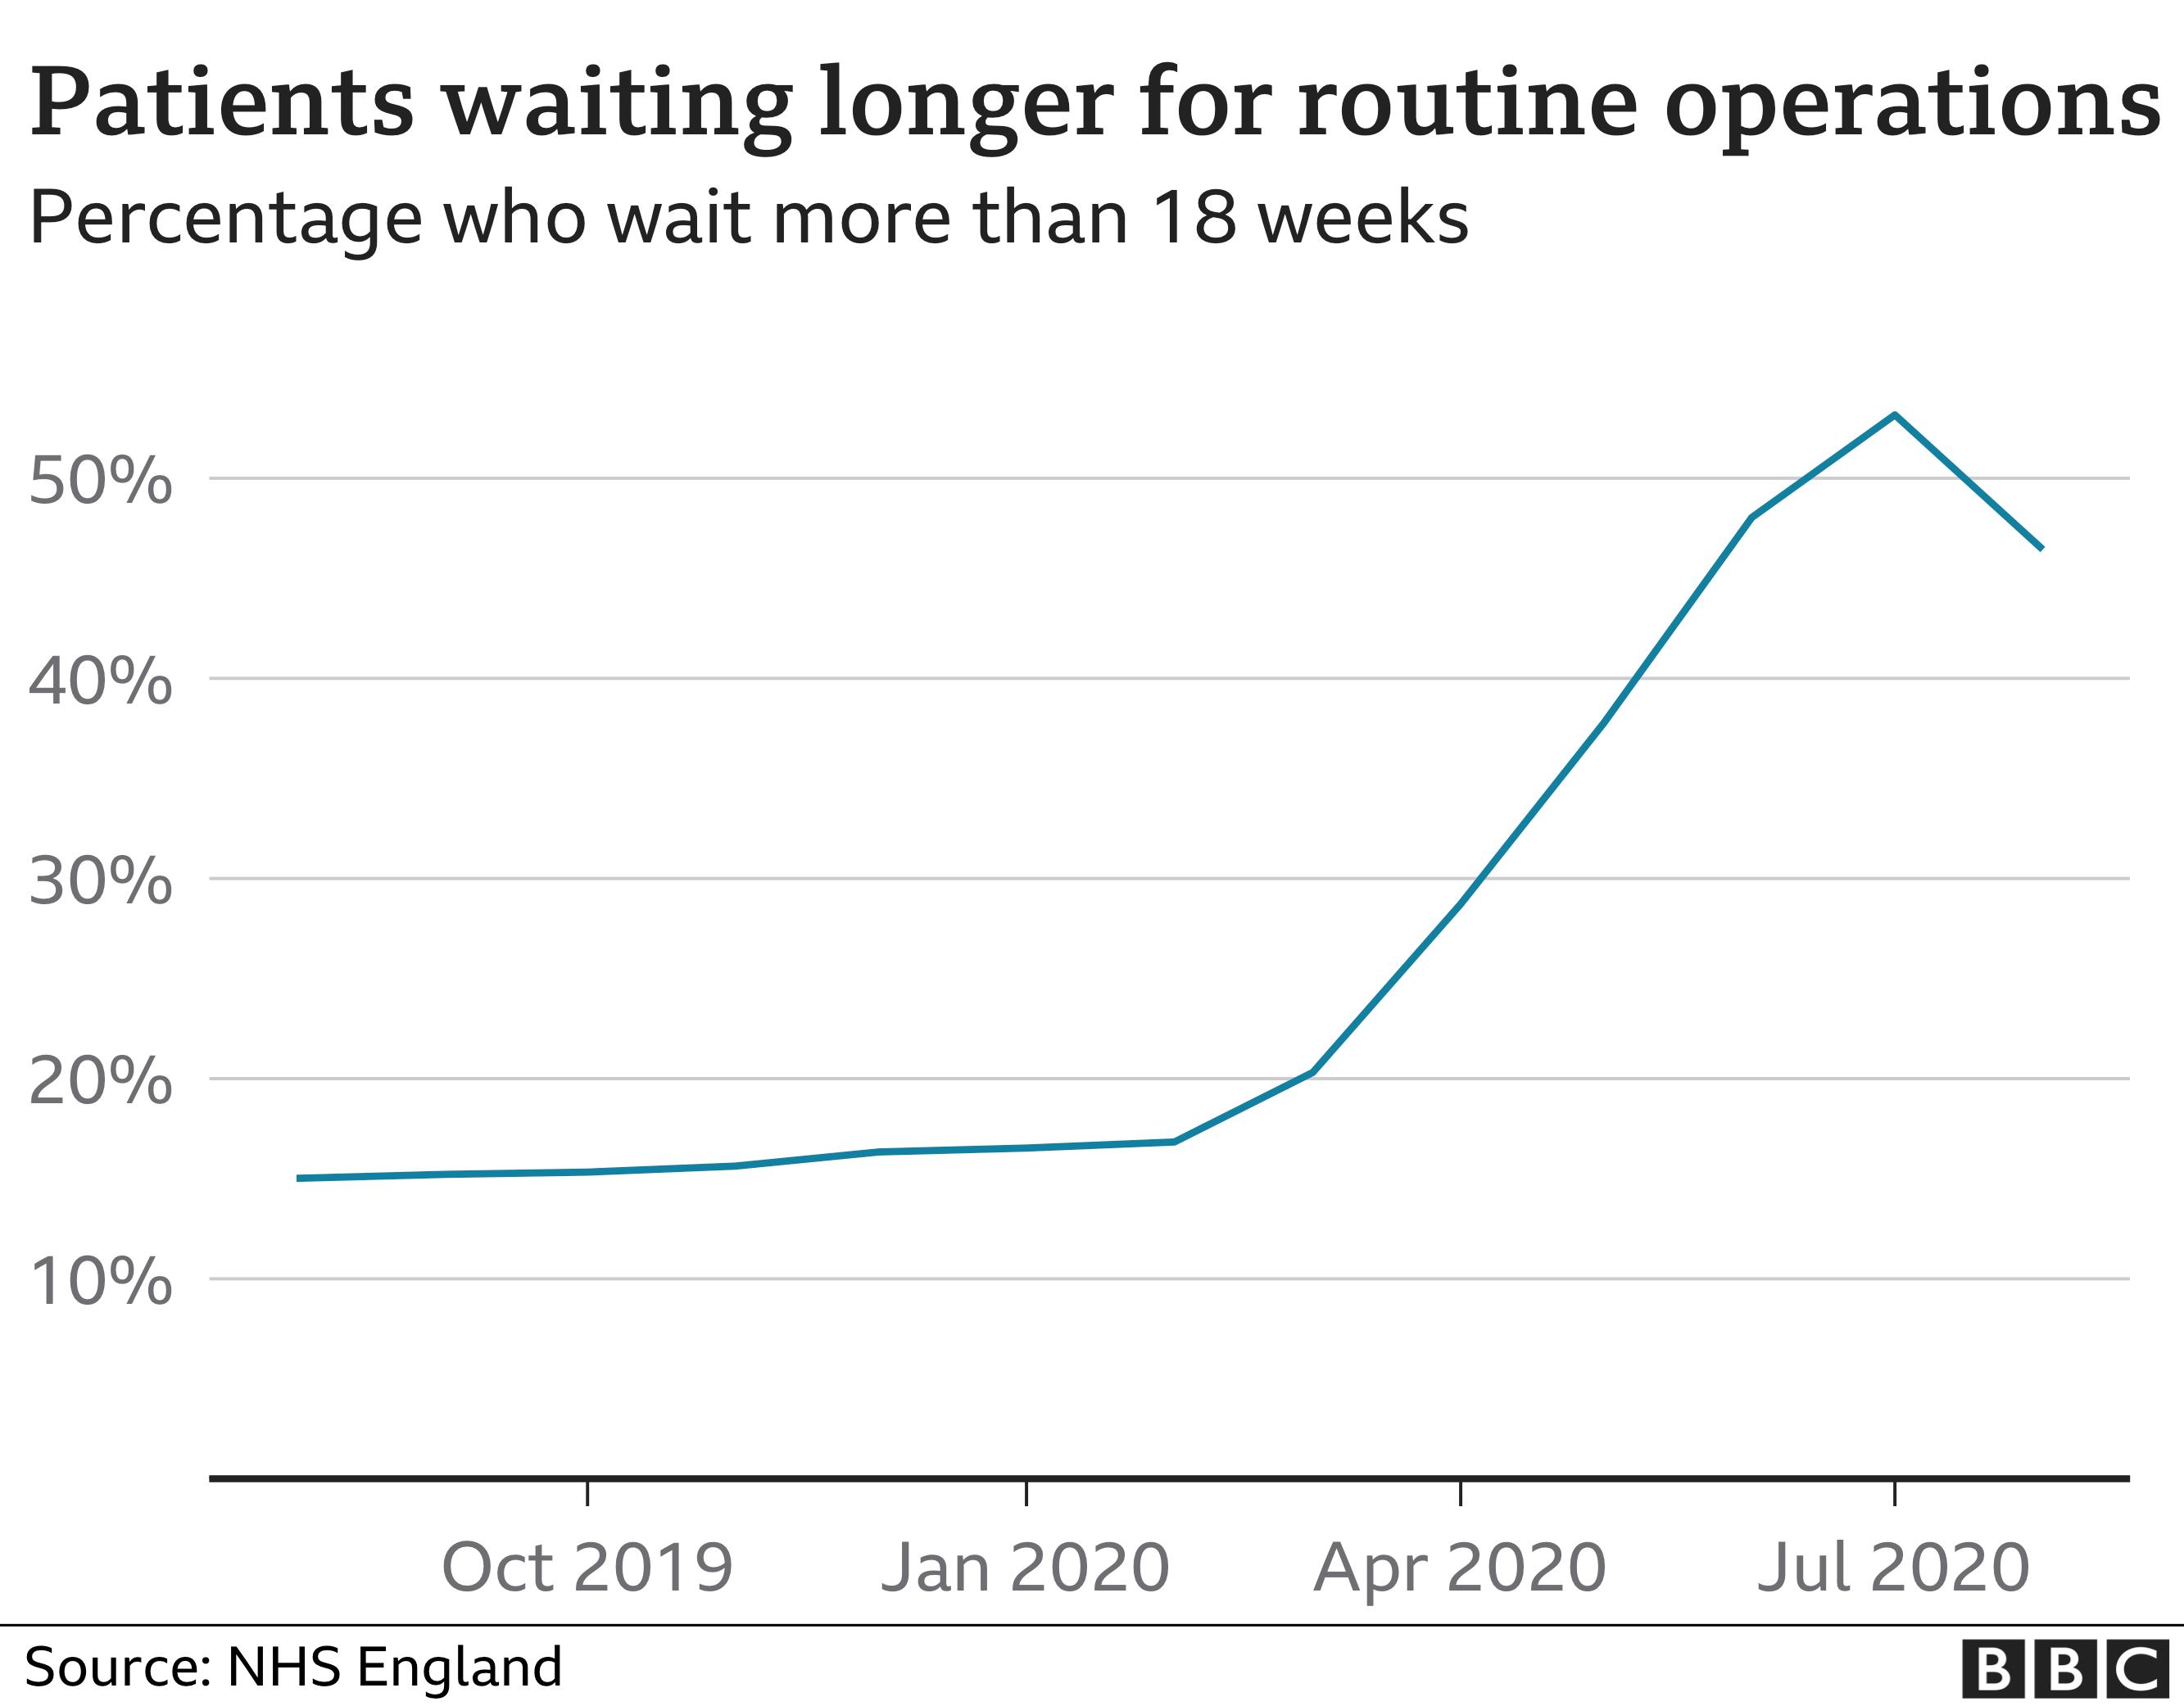 Patients waiting longer for operations